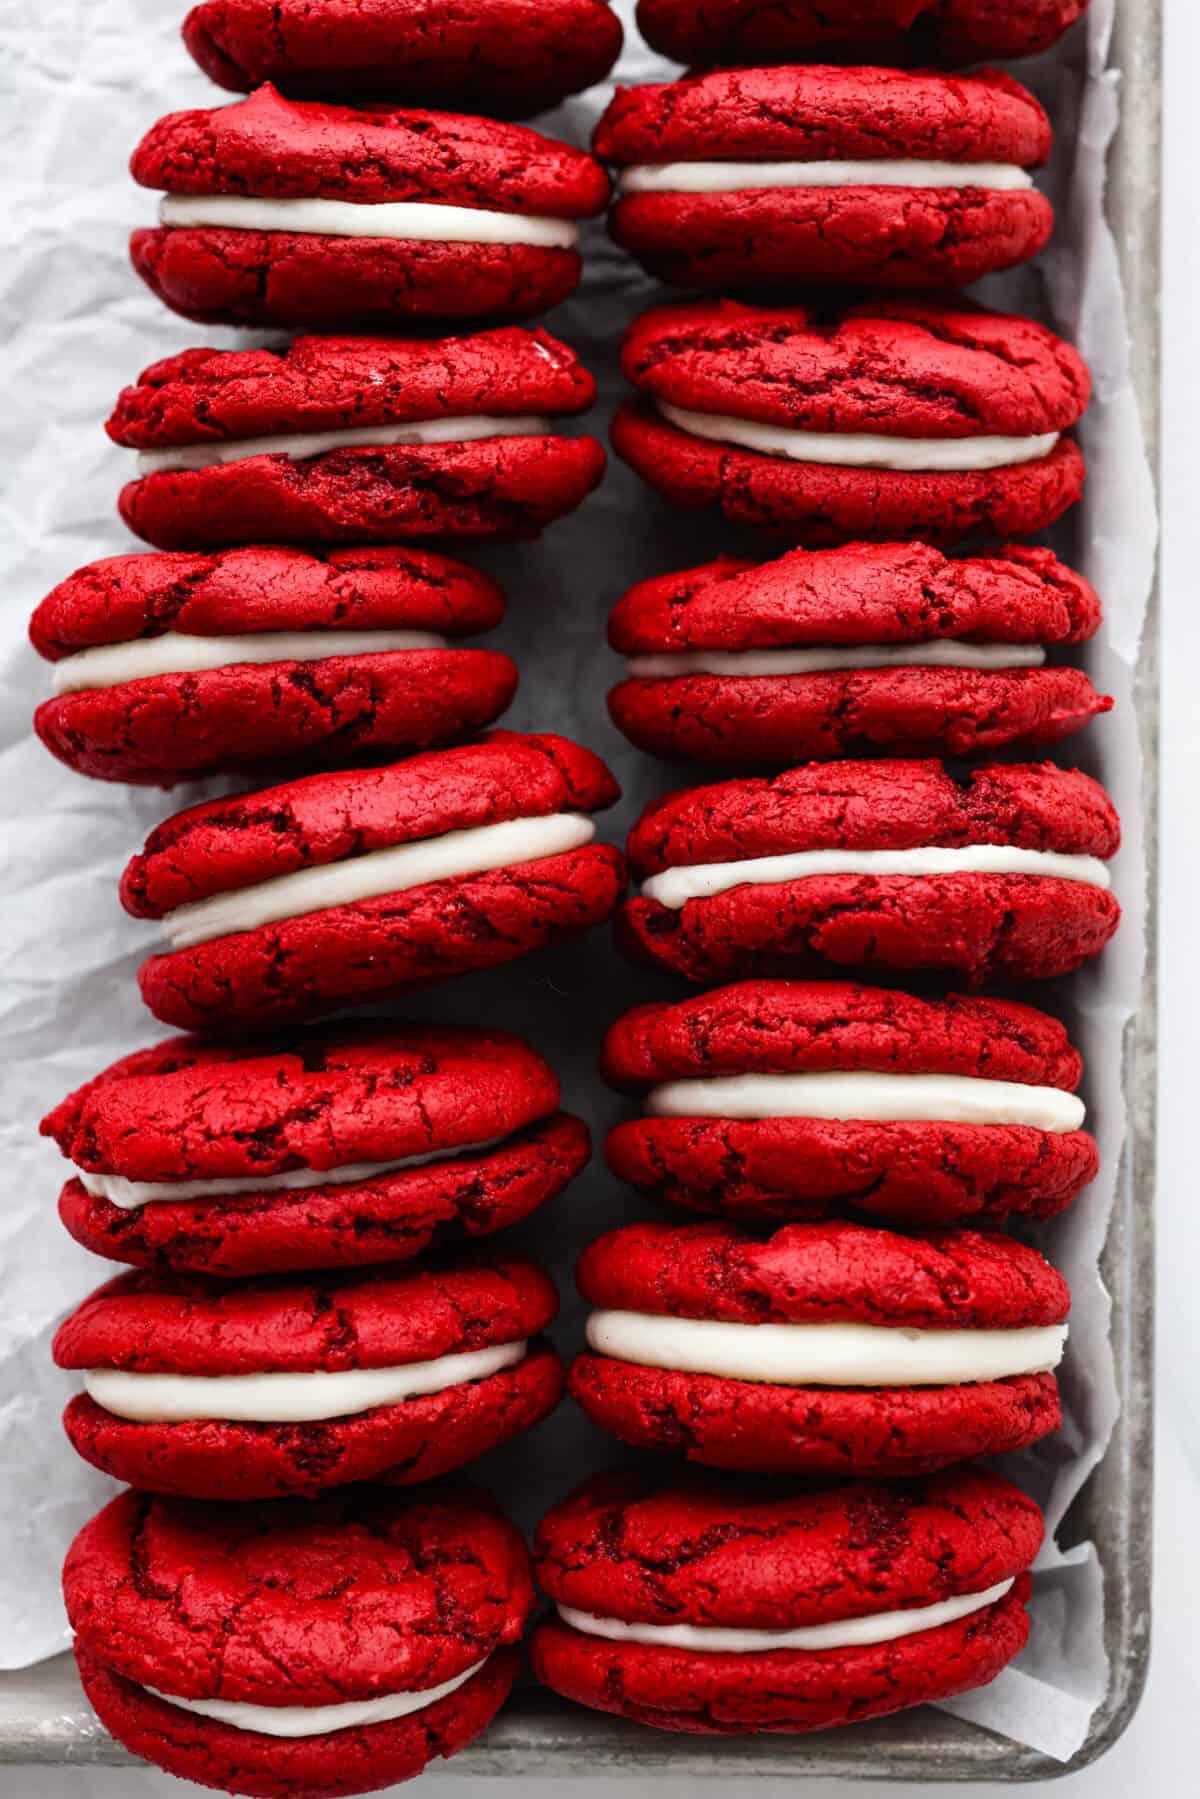 Overhead view of red velvet Oreos on a baking sheet pan lined with parchment paper.